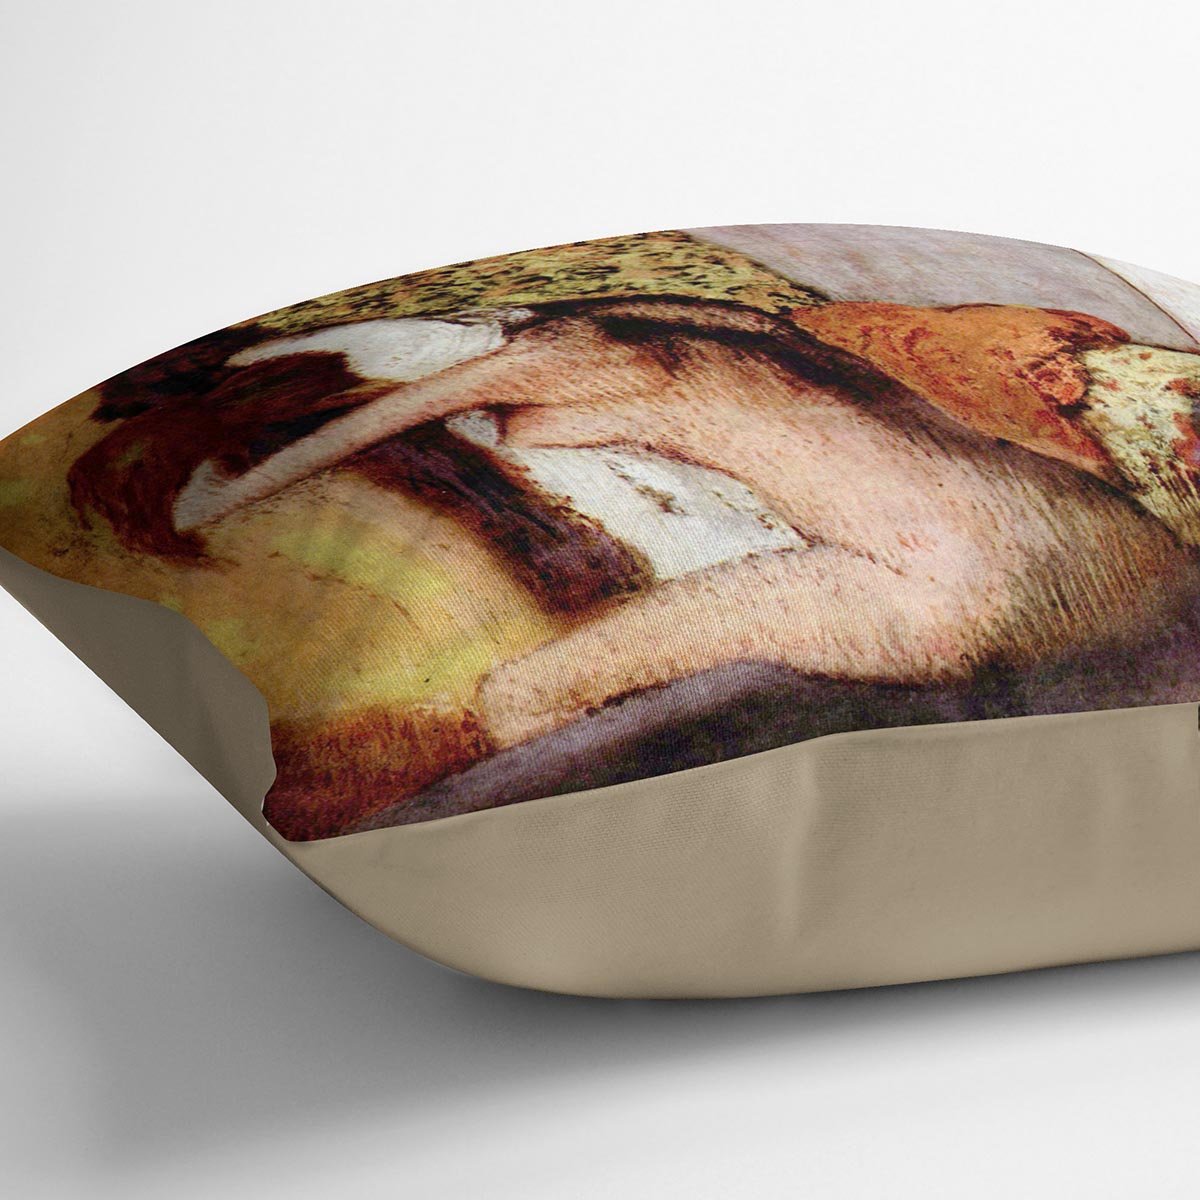 After bathing 2 by Degas Cushion